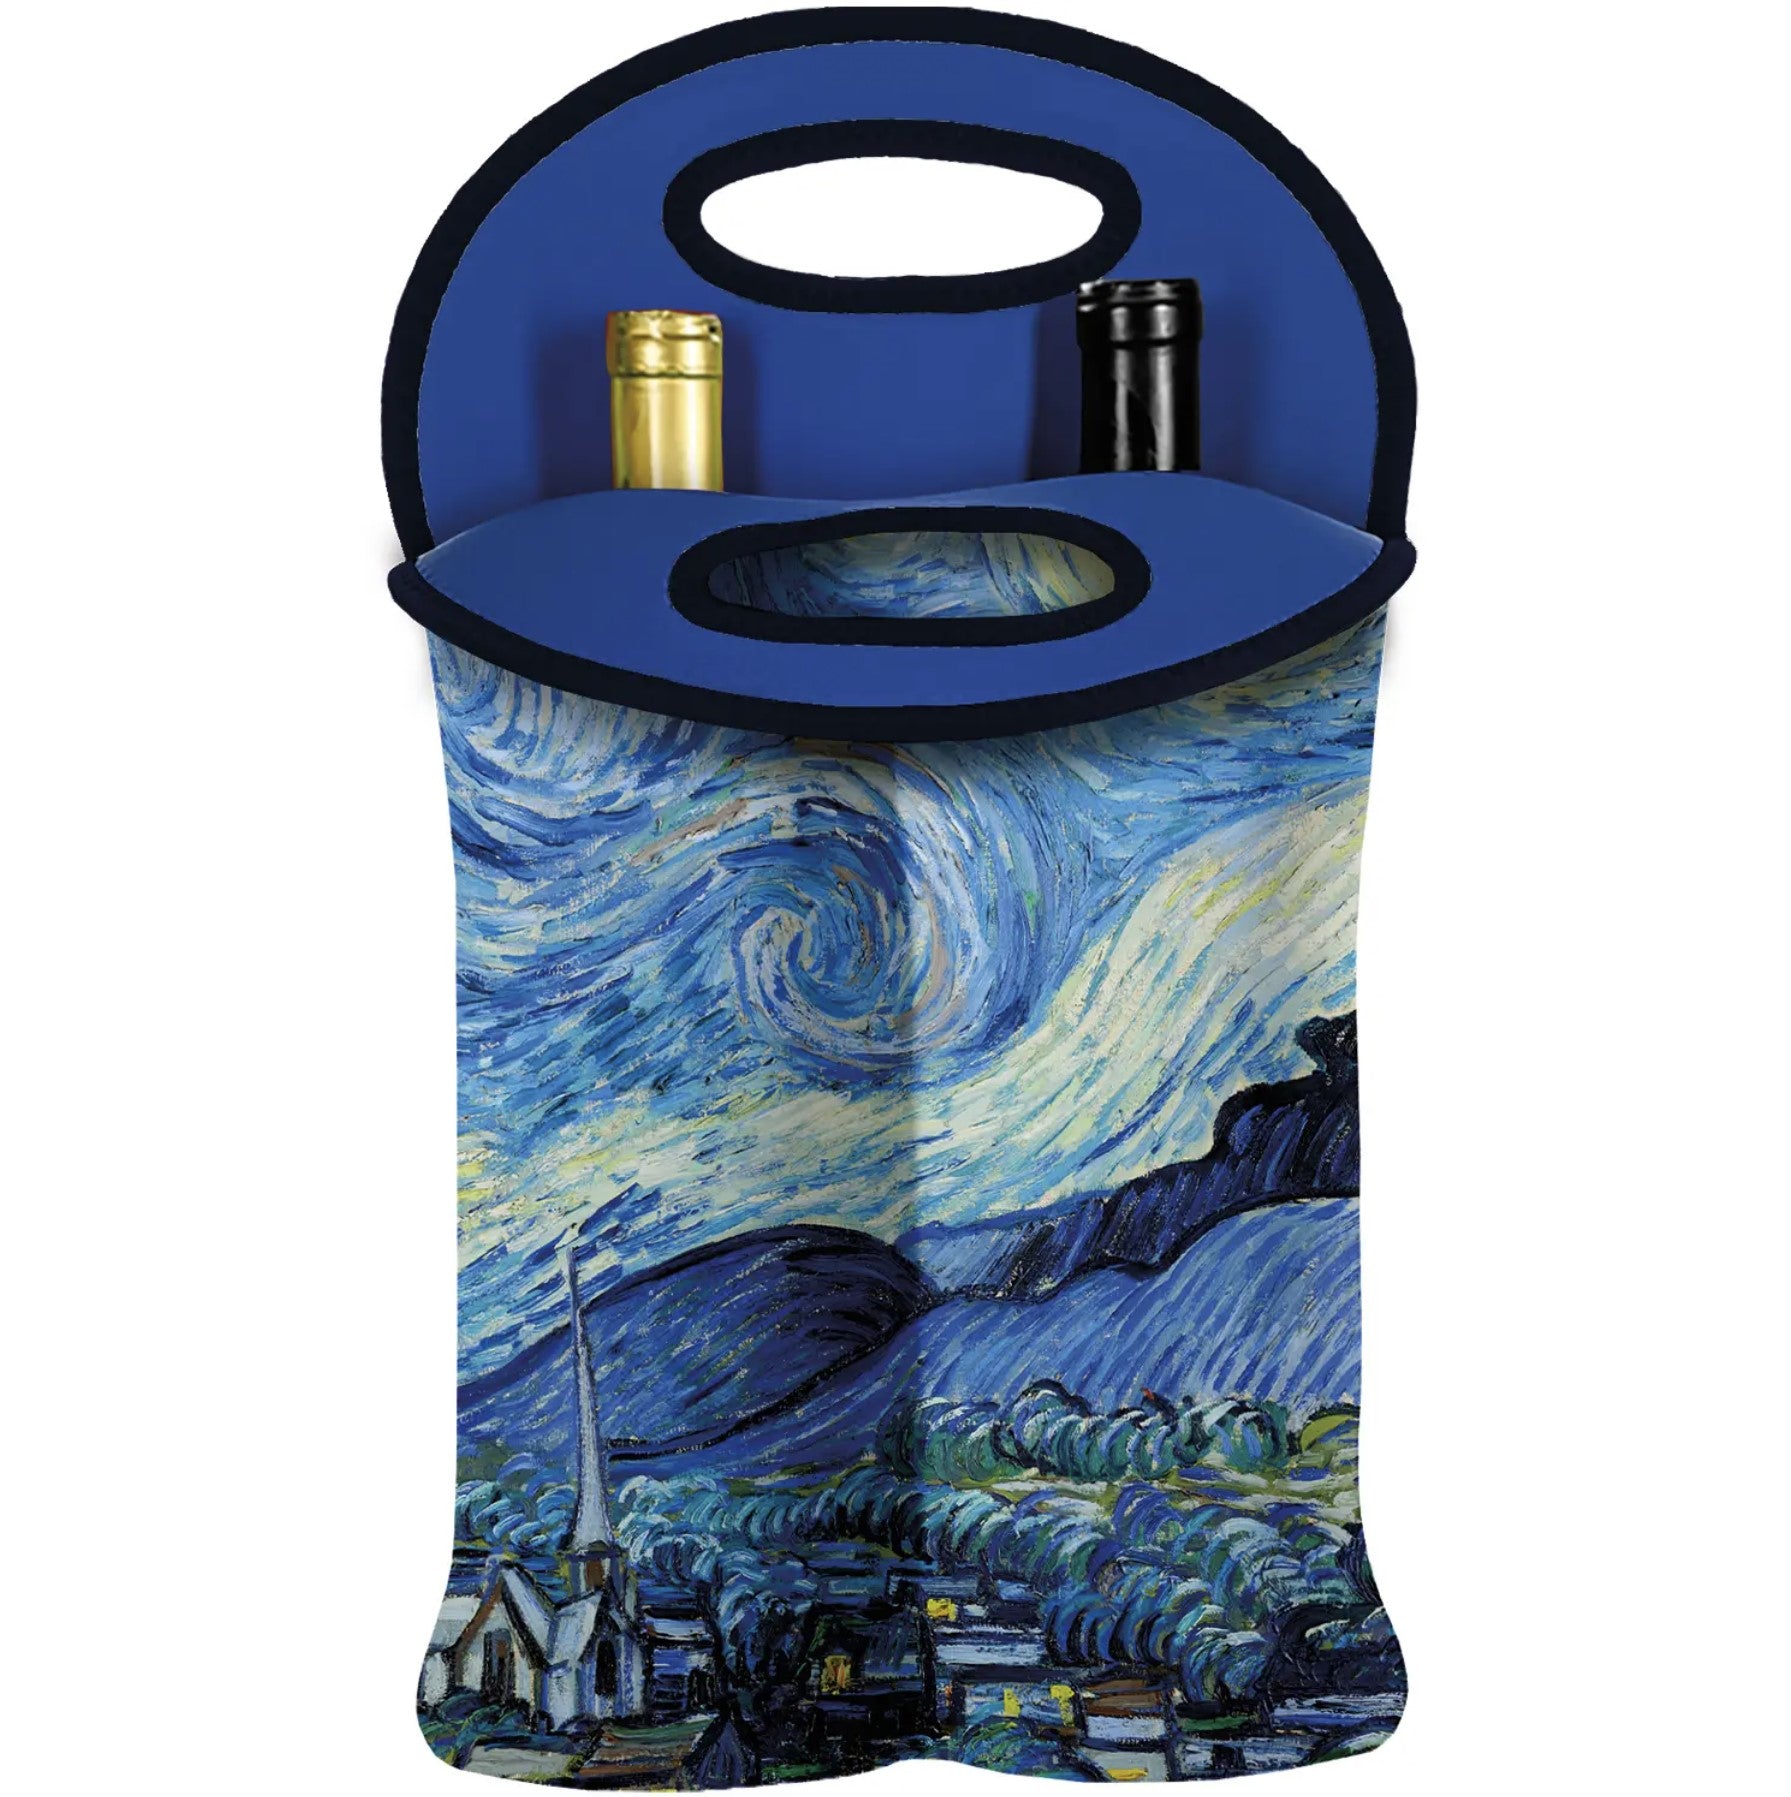 Double Wine Tote,    "Starry Night" by Vincent Van Gogh